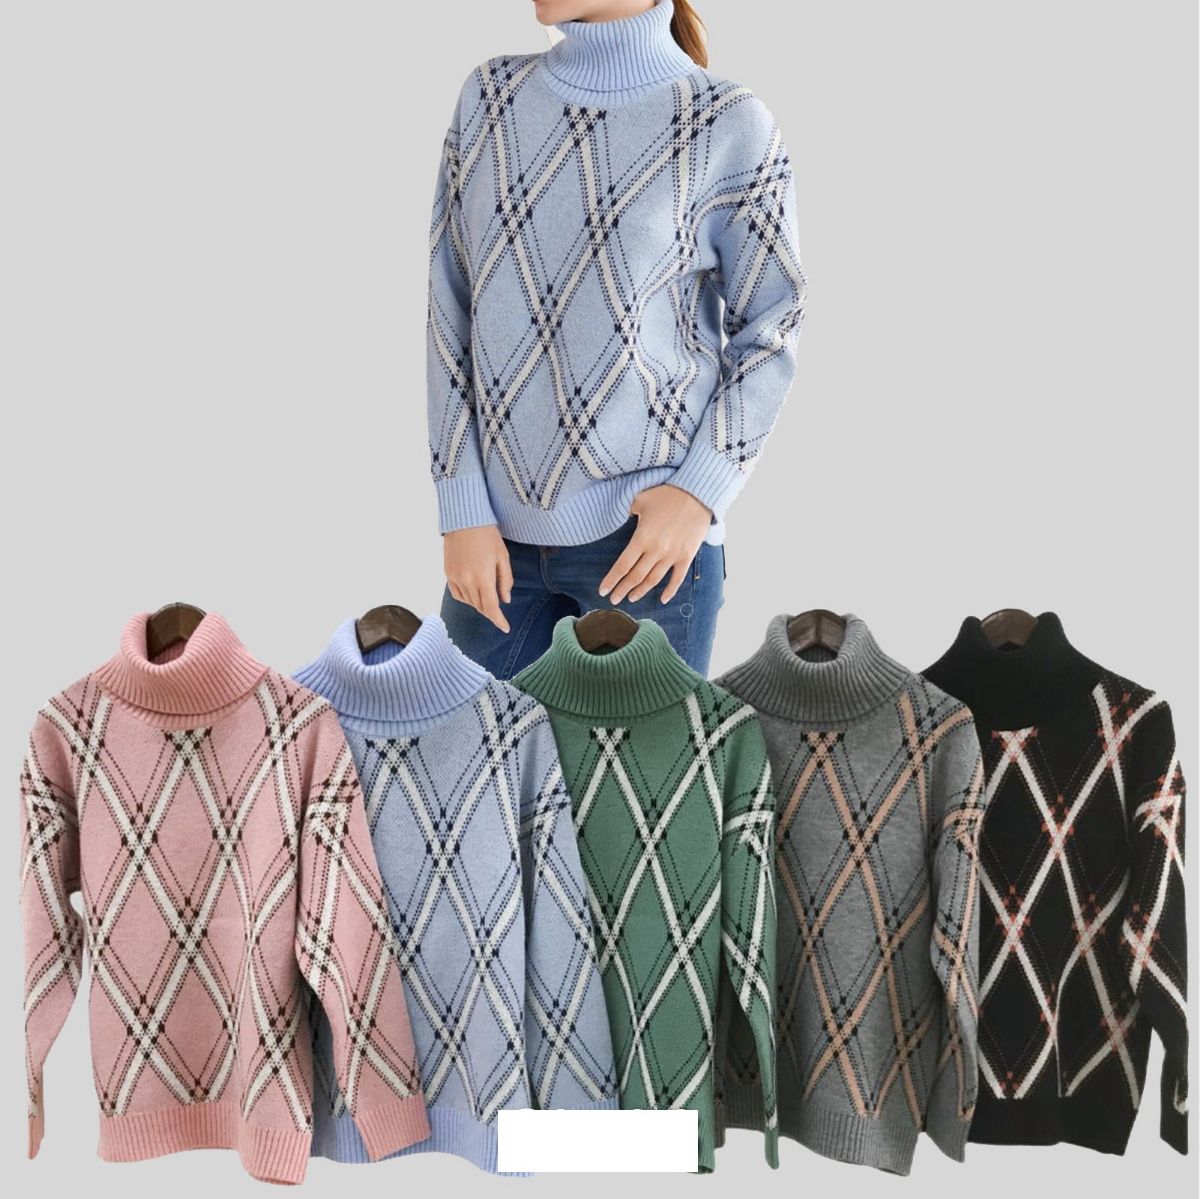 12 Pieces of Knitted Cashmere Turtleneck Sweater Stripes Design L/xl